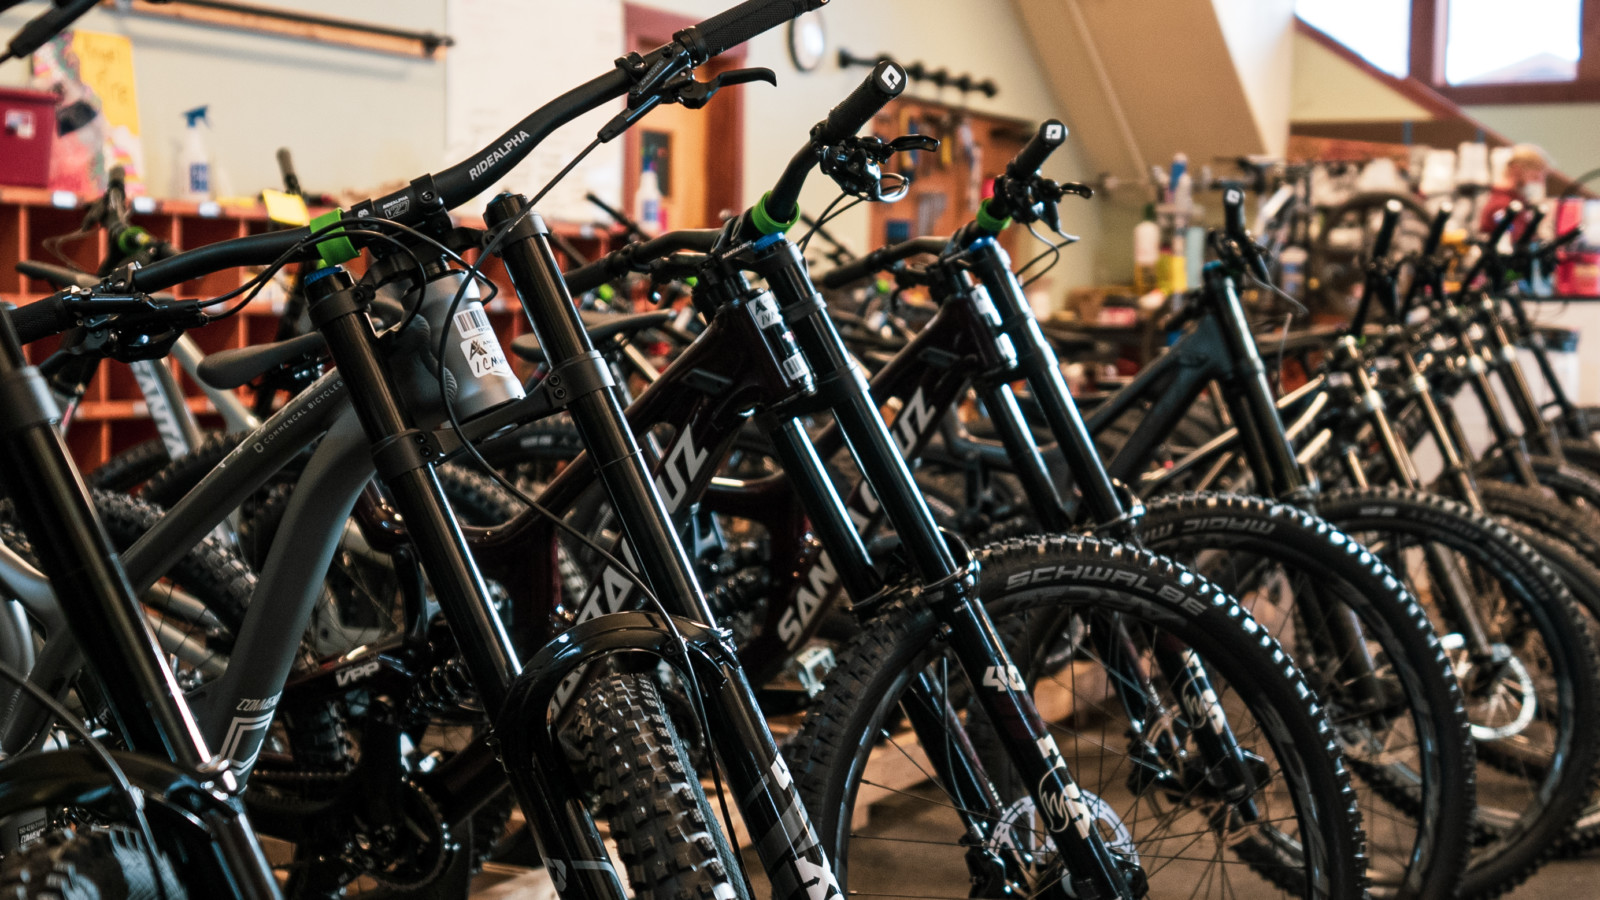 Company insurance is intended to safeguard the financial assets of a business owner and is a necessary investment for a bike rental establishment.